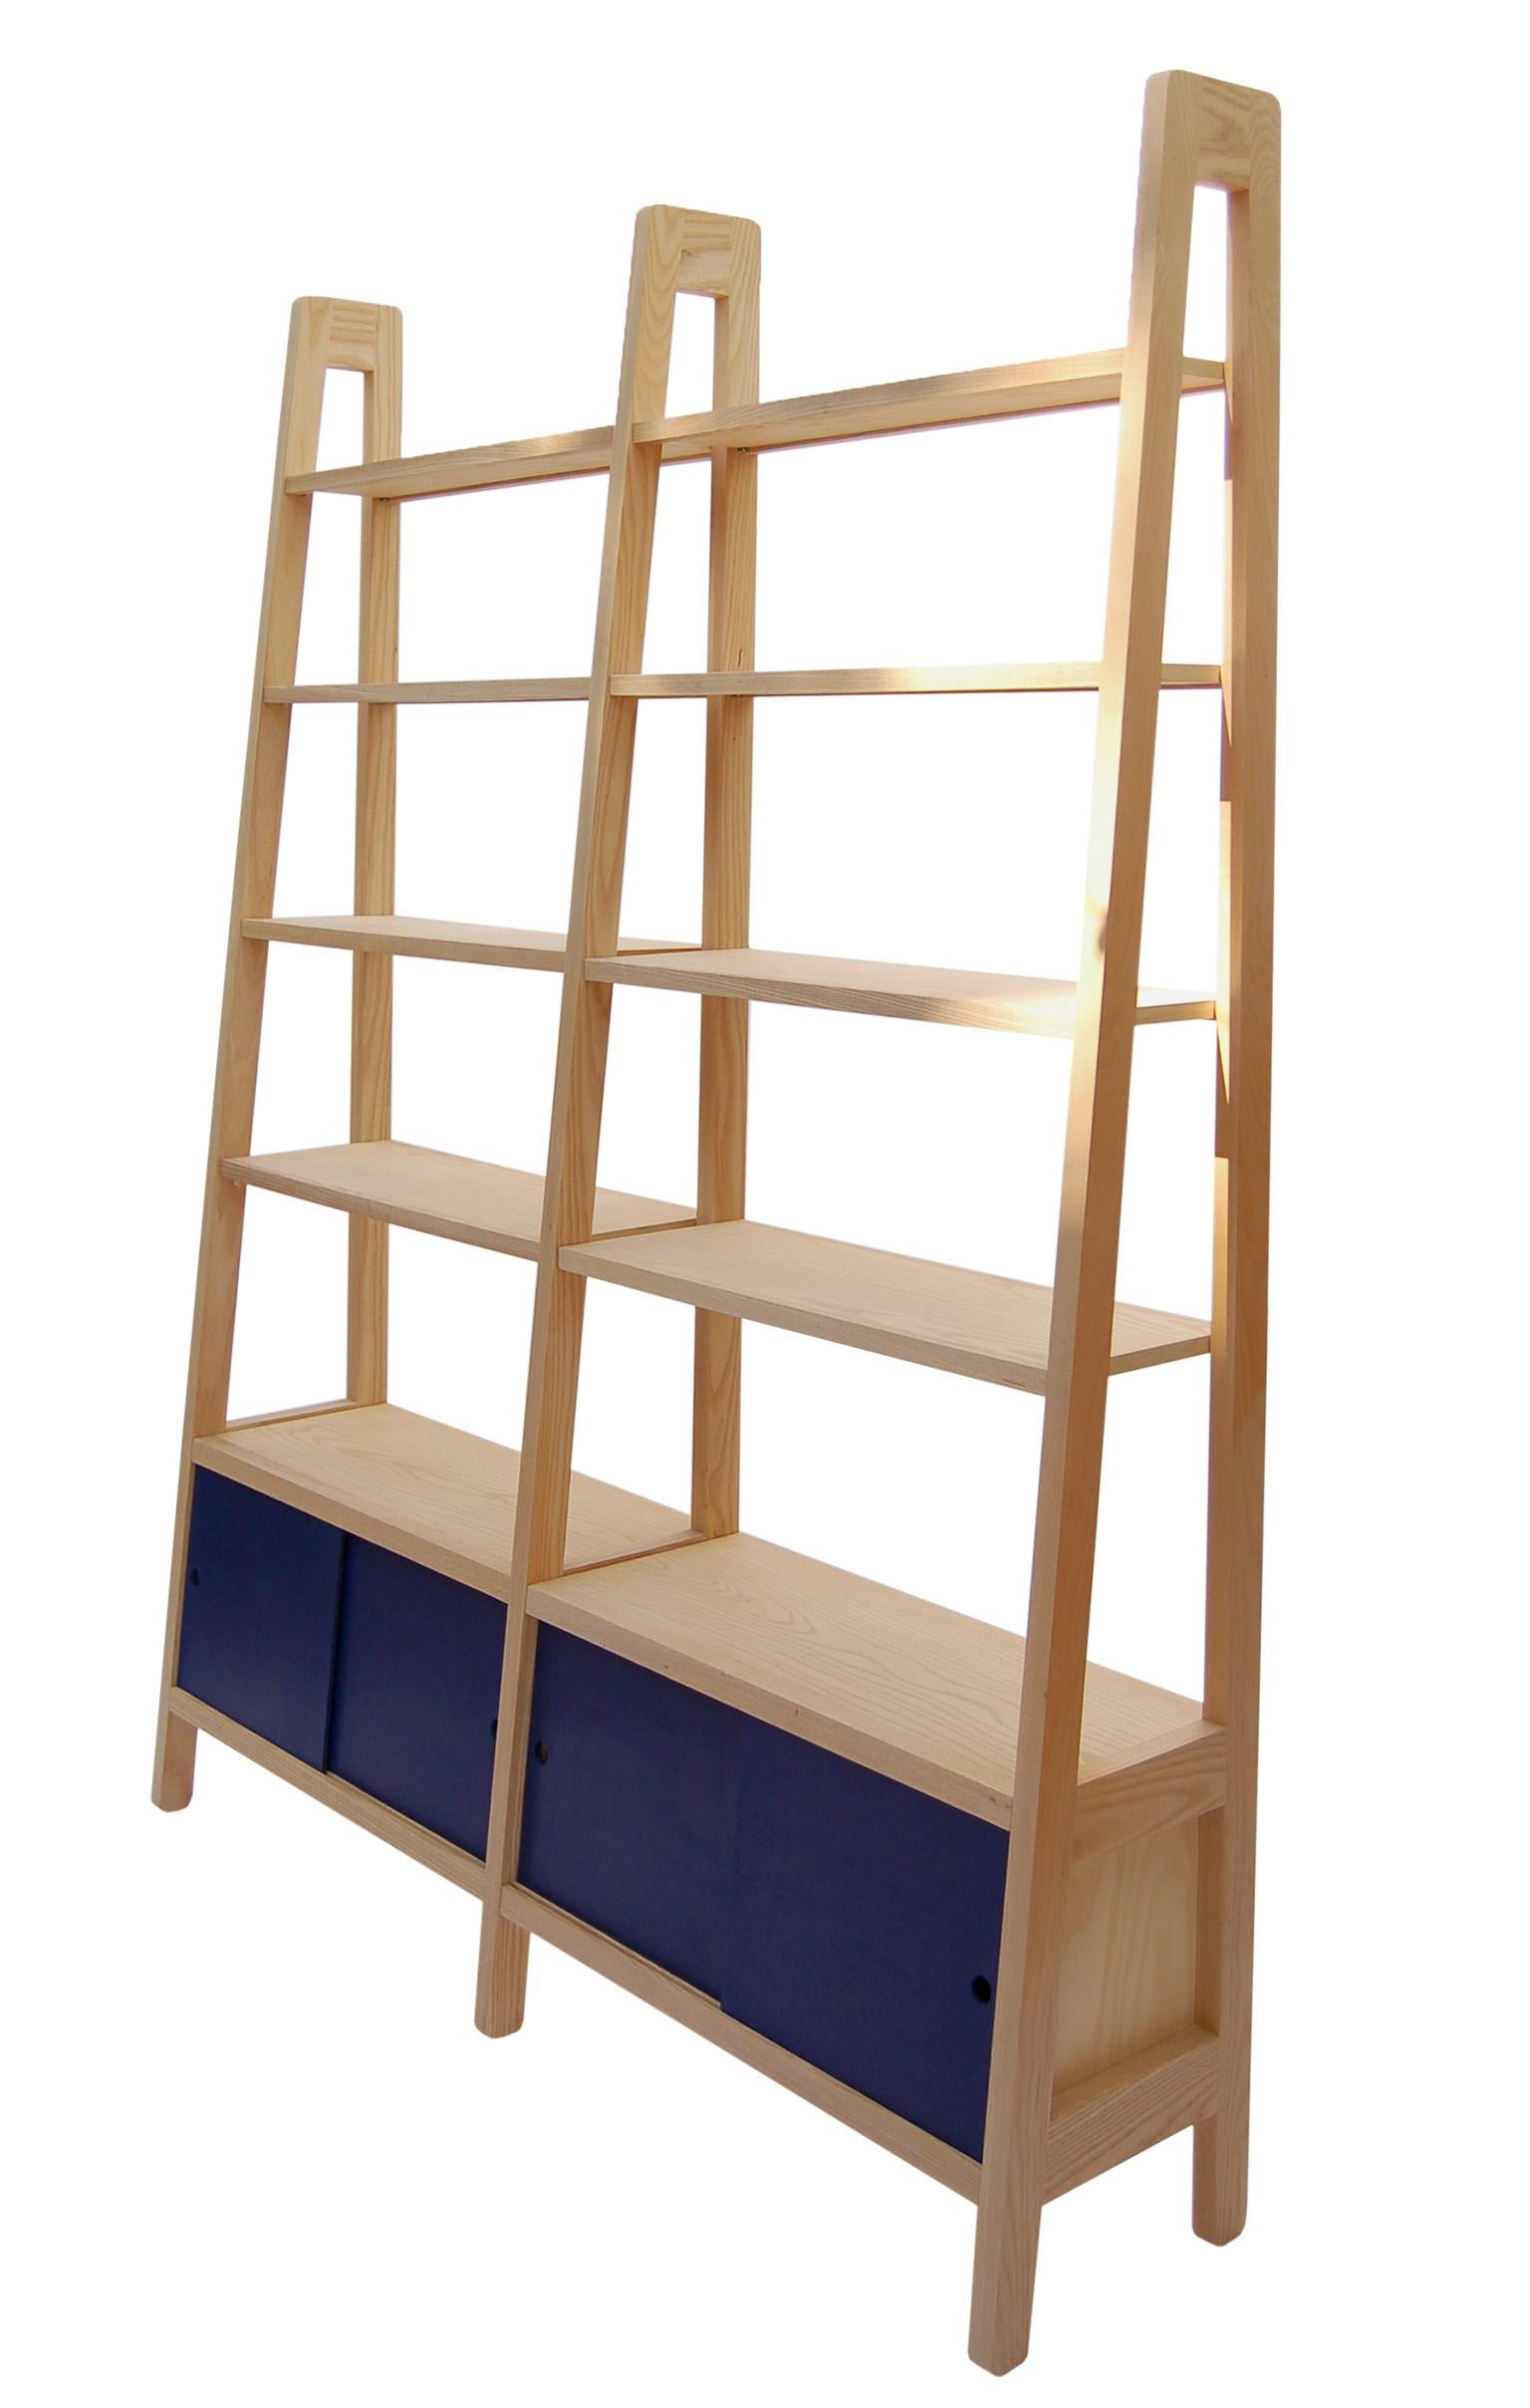 Collector Shelf in Ashwood with Blue Accents (amerikanisch) im Angebot